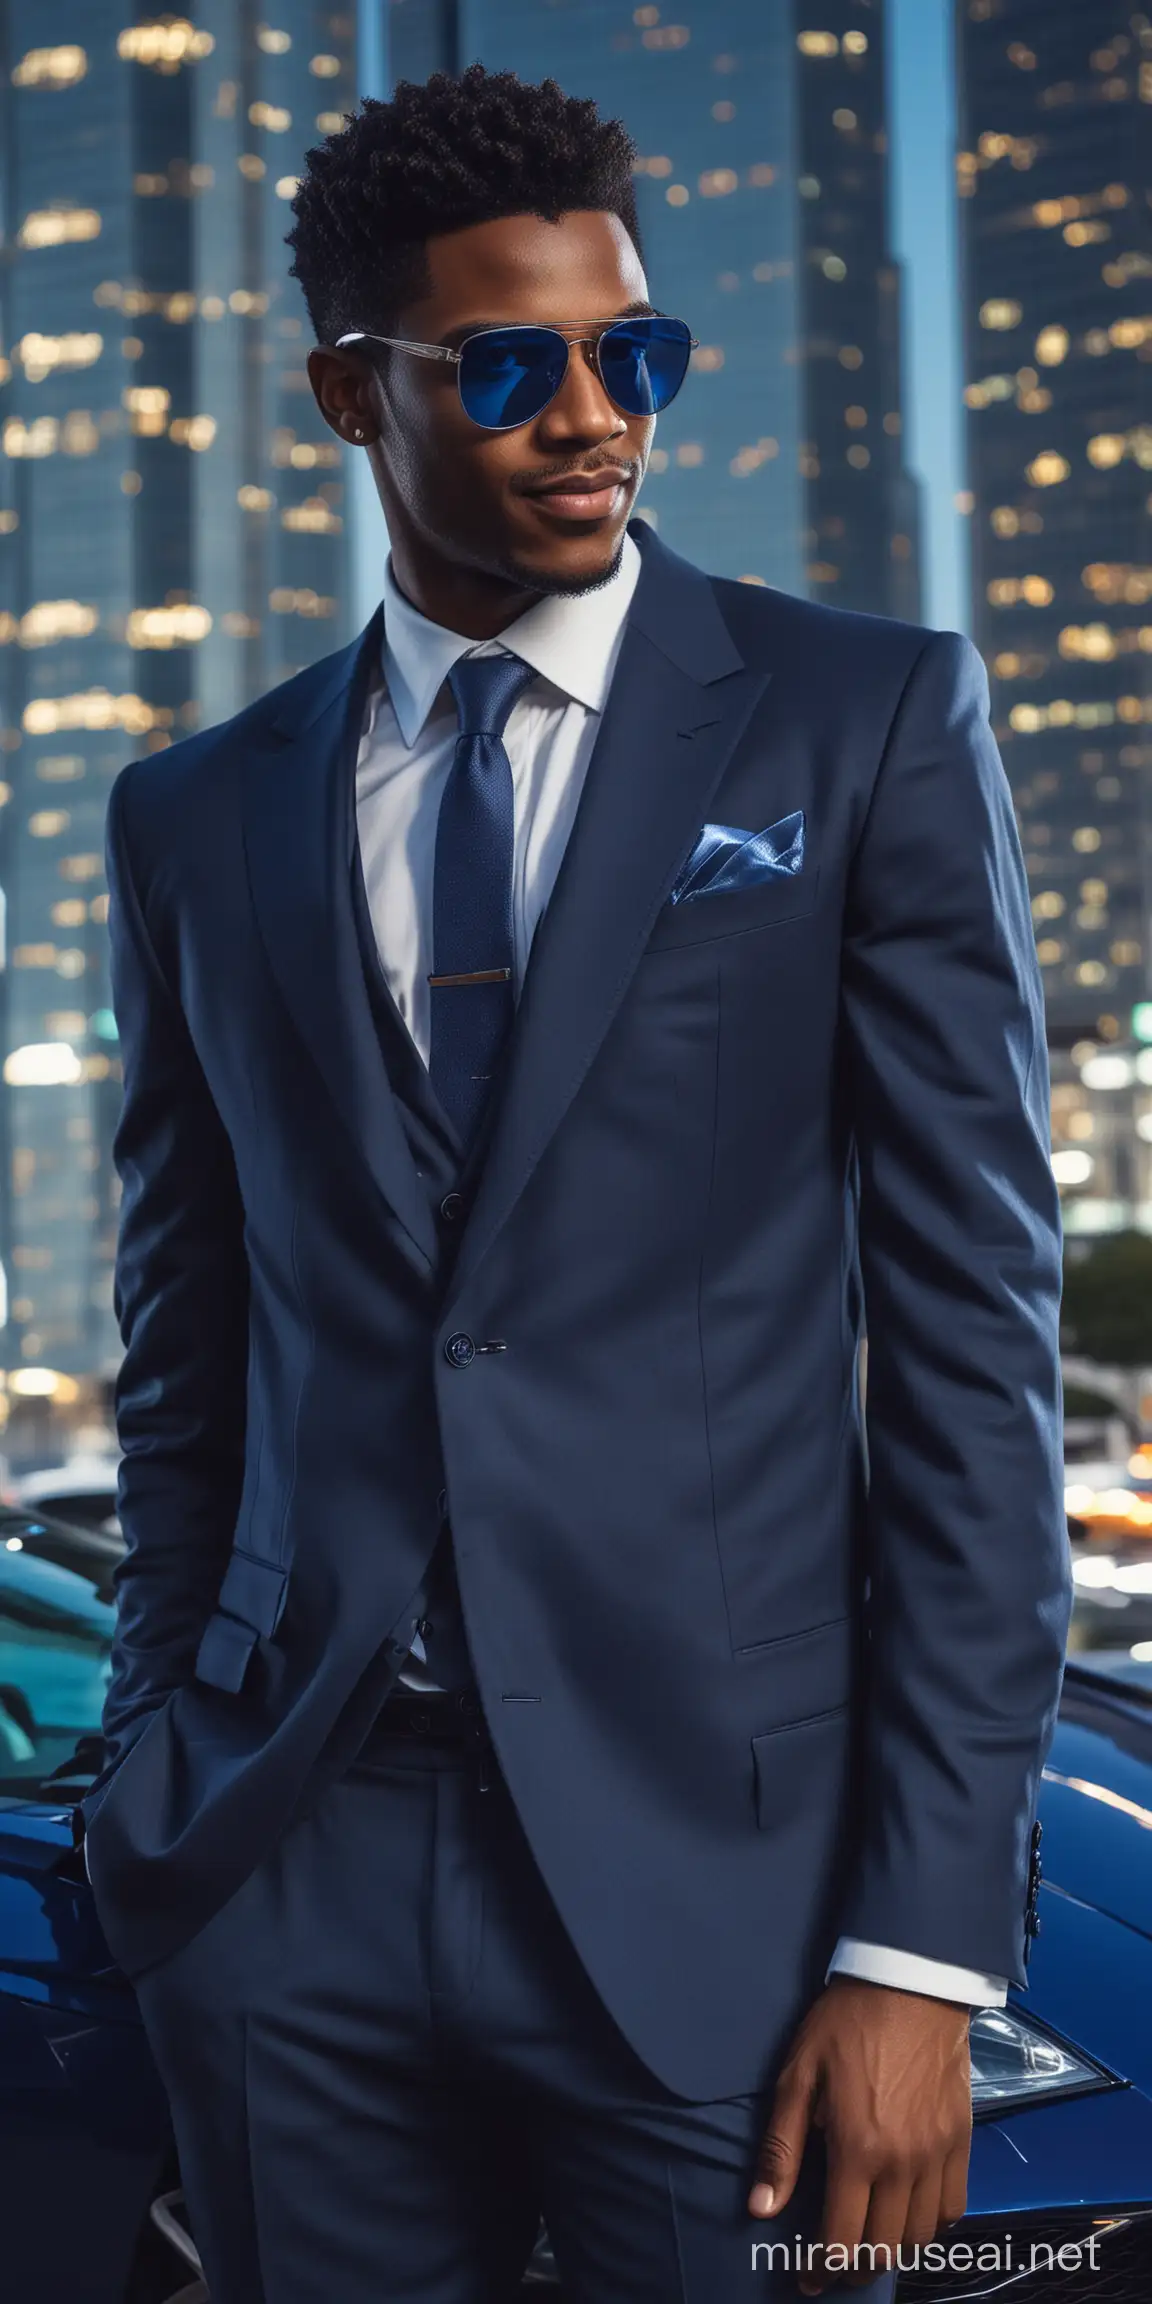 A handsome young black man in a cool navy blue suit and eye shades, smirking out while leaning against a Lamborghini, with blue luminous skyscrapers glowing behind him